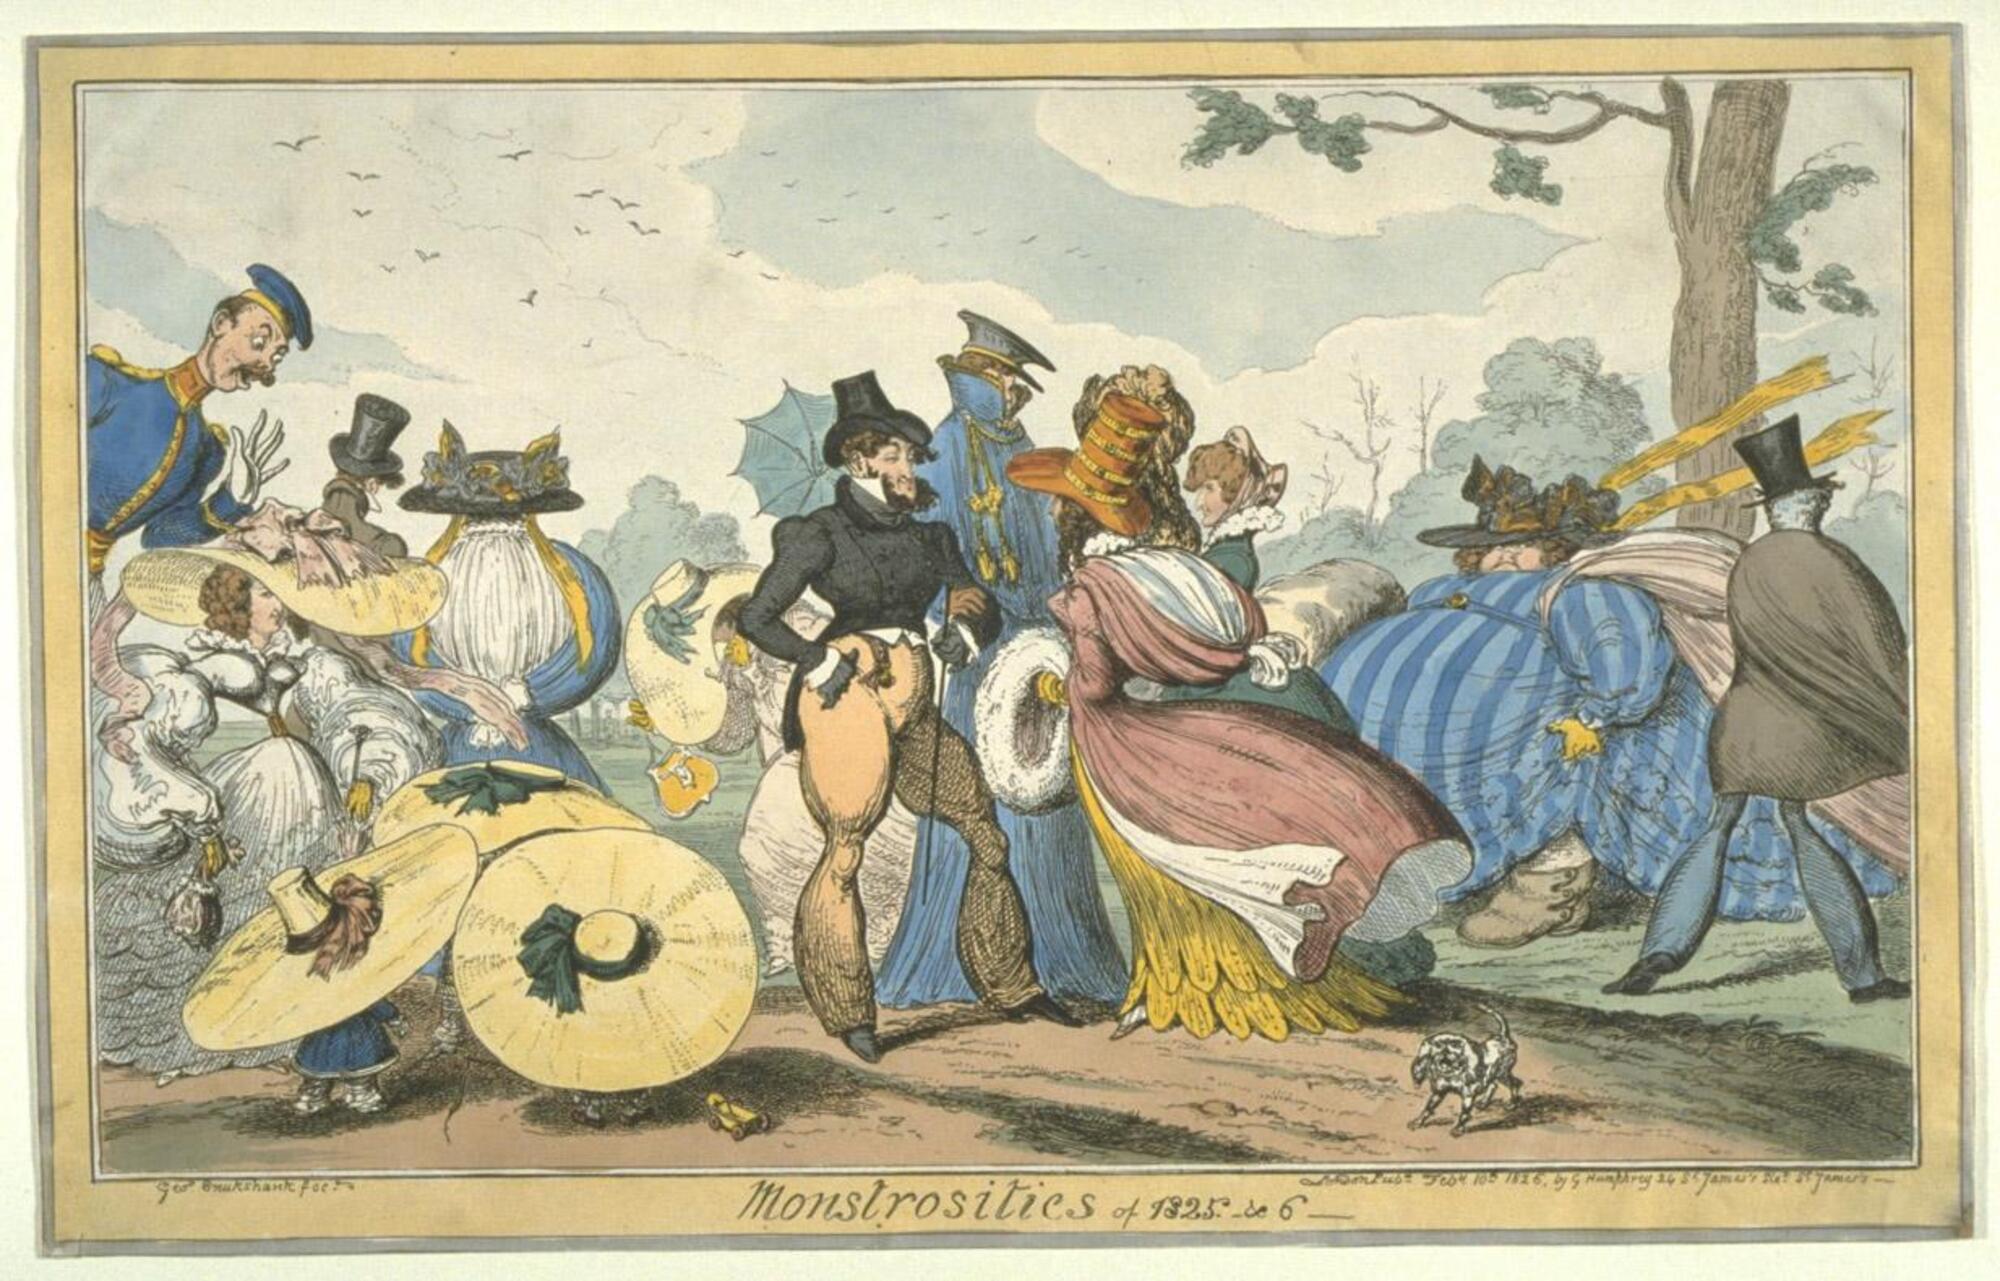 Fashionable figures promenading on a windy day are arrayed in a shallow, congested space across the image field. The blustery wind accents the wind-whipped broad straw hats, ribbons, and skirts of the women, rendering some of them faceless. Three children at the lower left appear as mushrooms while the woman in white behind them has an improbably pinched waistline.